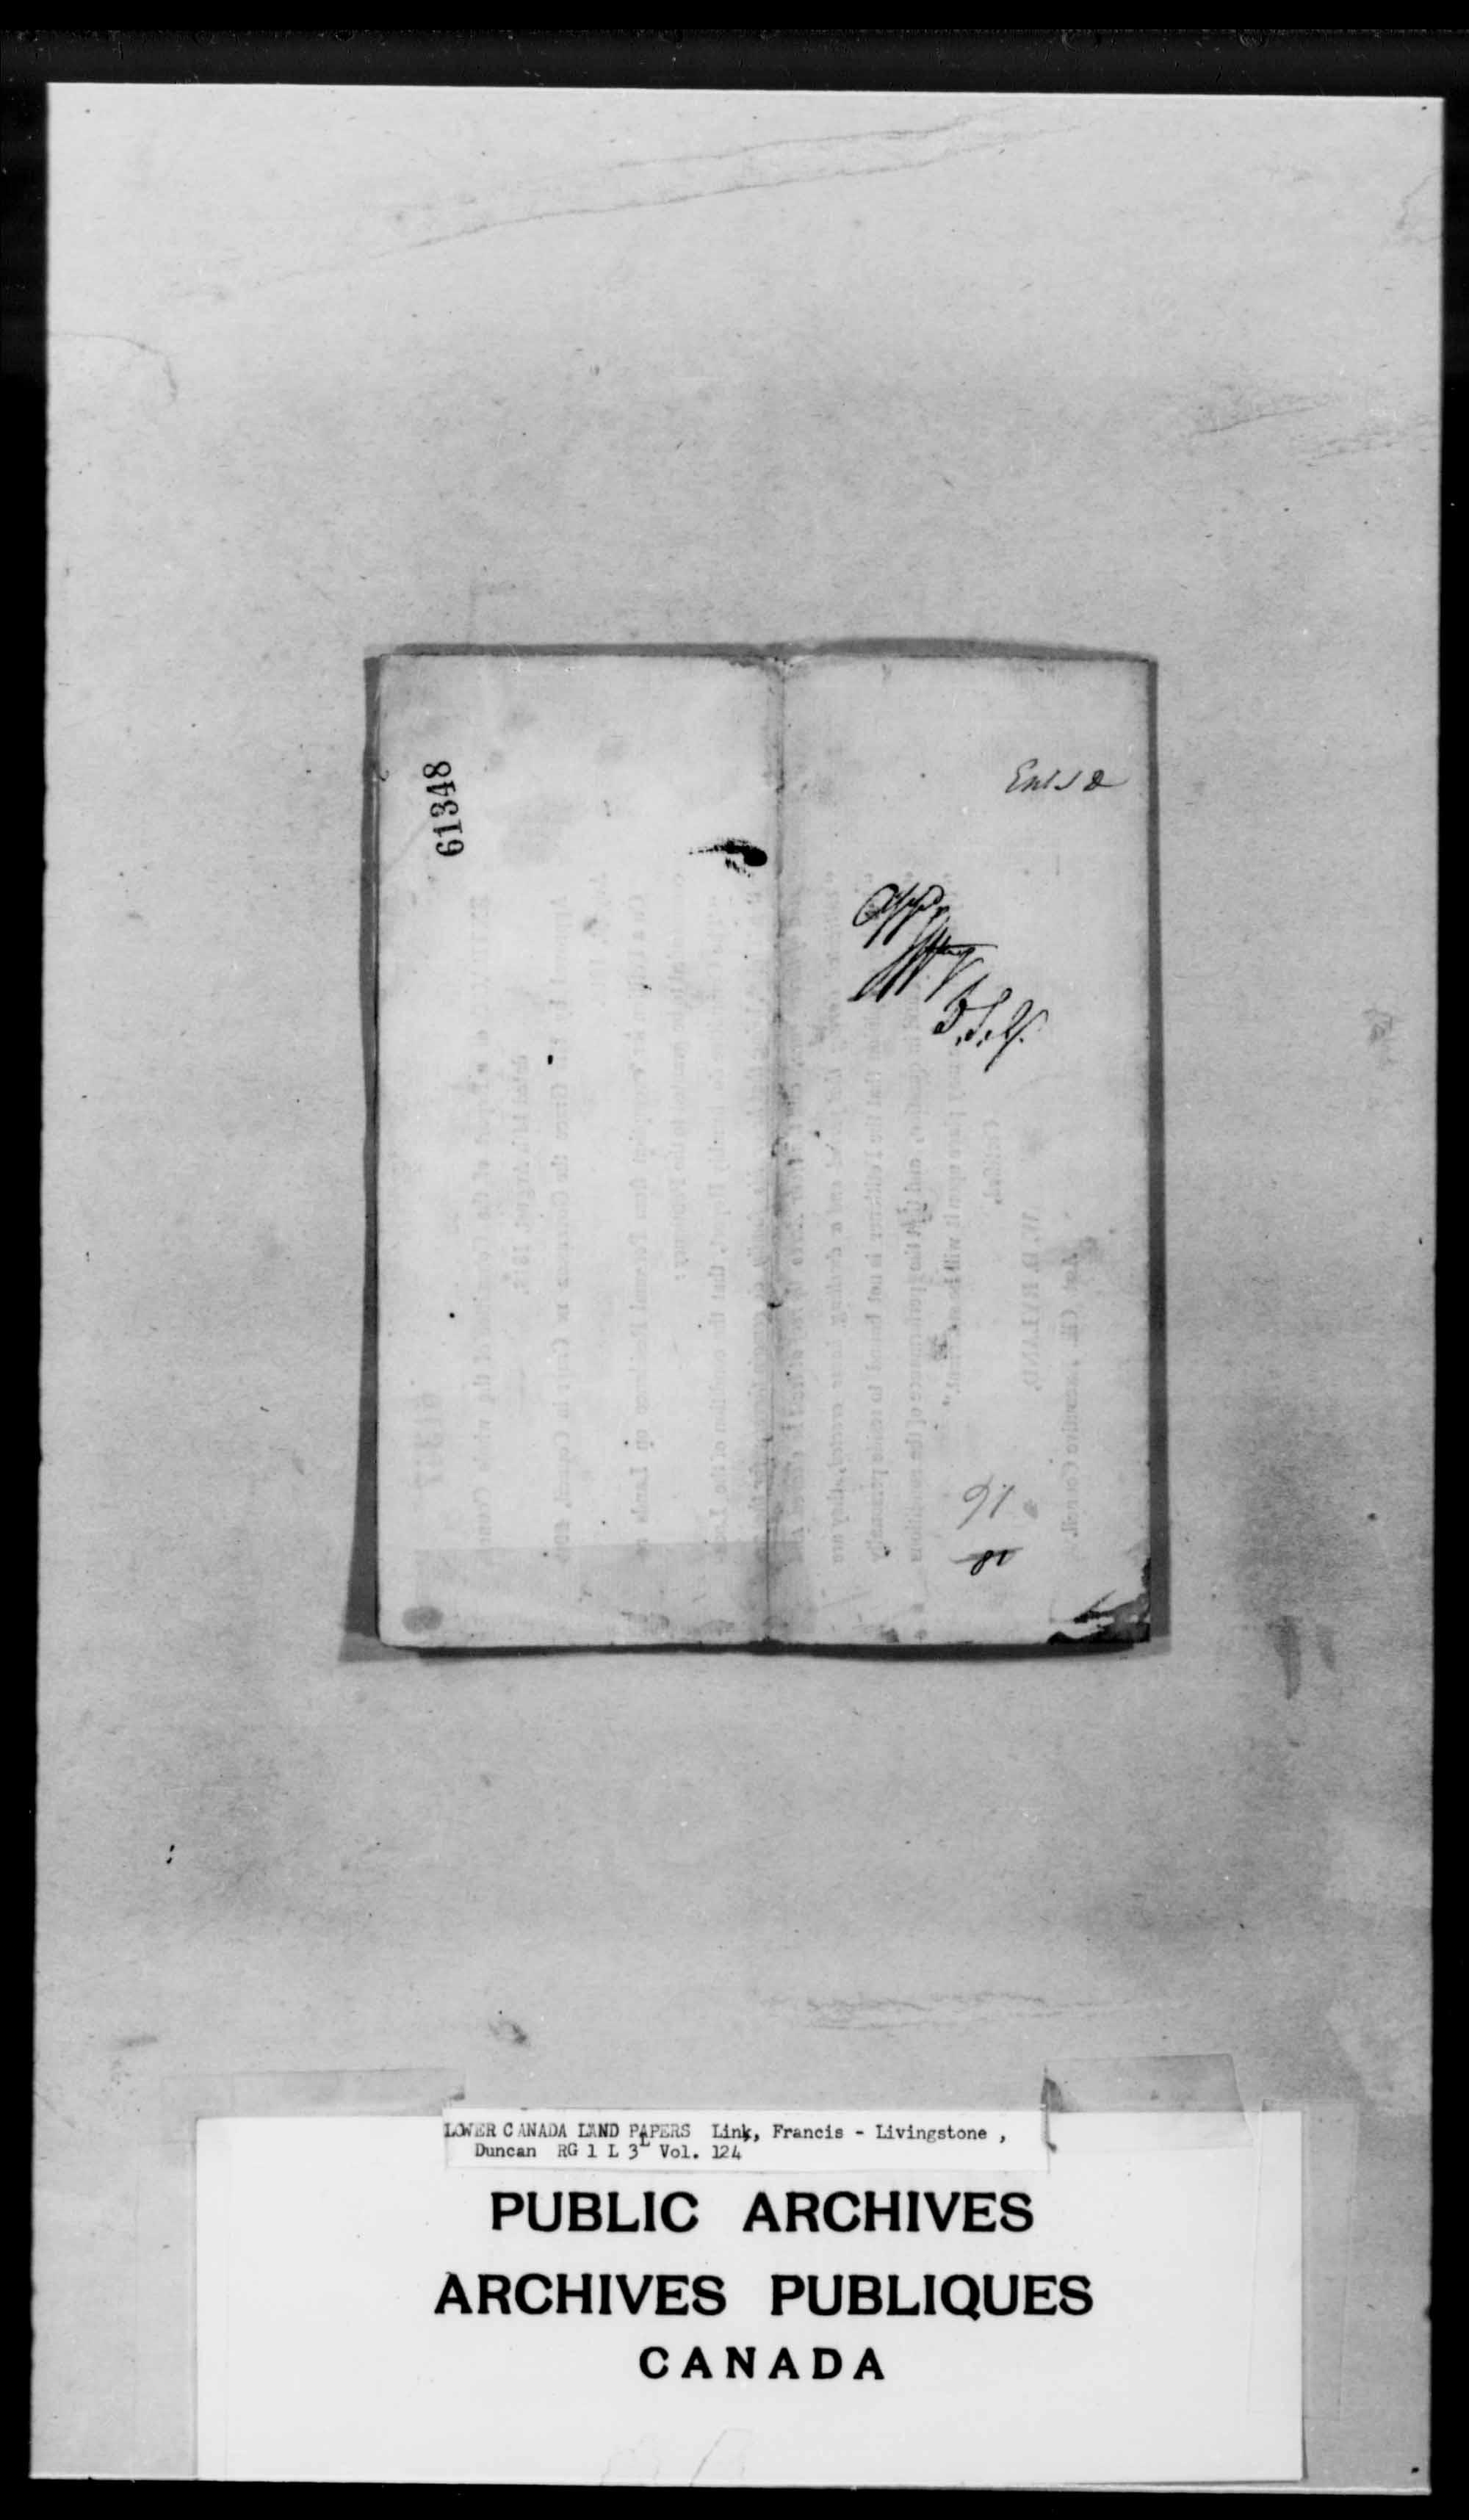 Digitized page of  for Image No.: e008706197